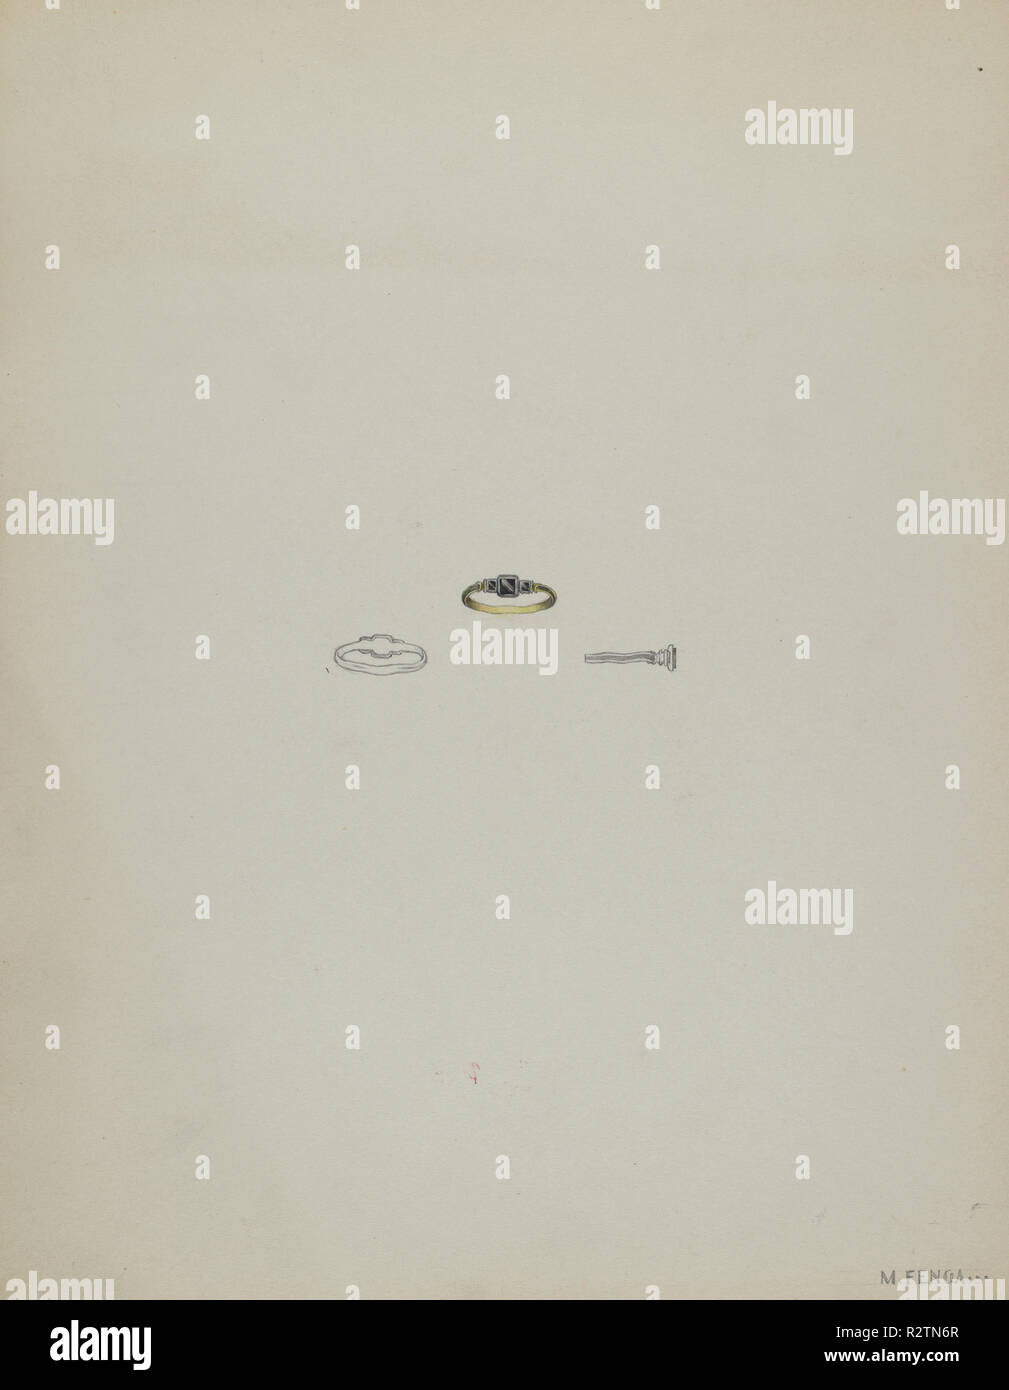 Mourning Ring. Dated: c. 1936. Dimensions: overall: 28.9 x 22.8 cm (11 3/8 x 9 in.). Medium: watercolor and graphite on paperboard. Museum: National Gallery of Art, Washington DC. Author: Michael Fenga. Stock Photo